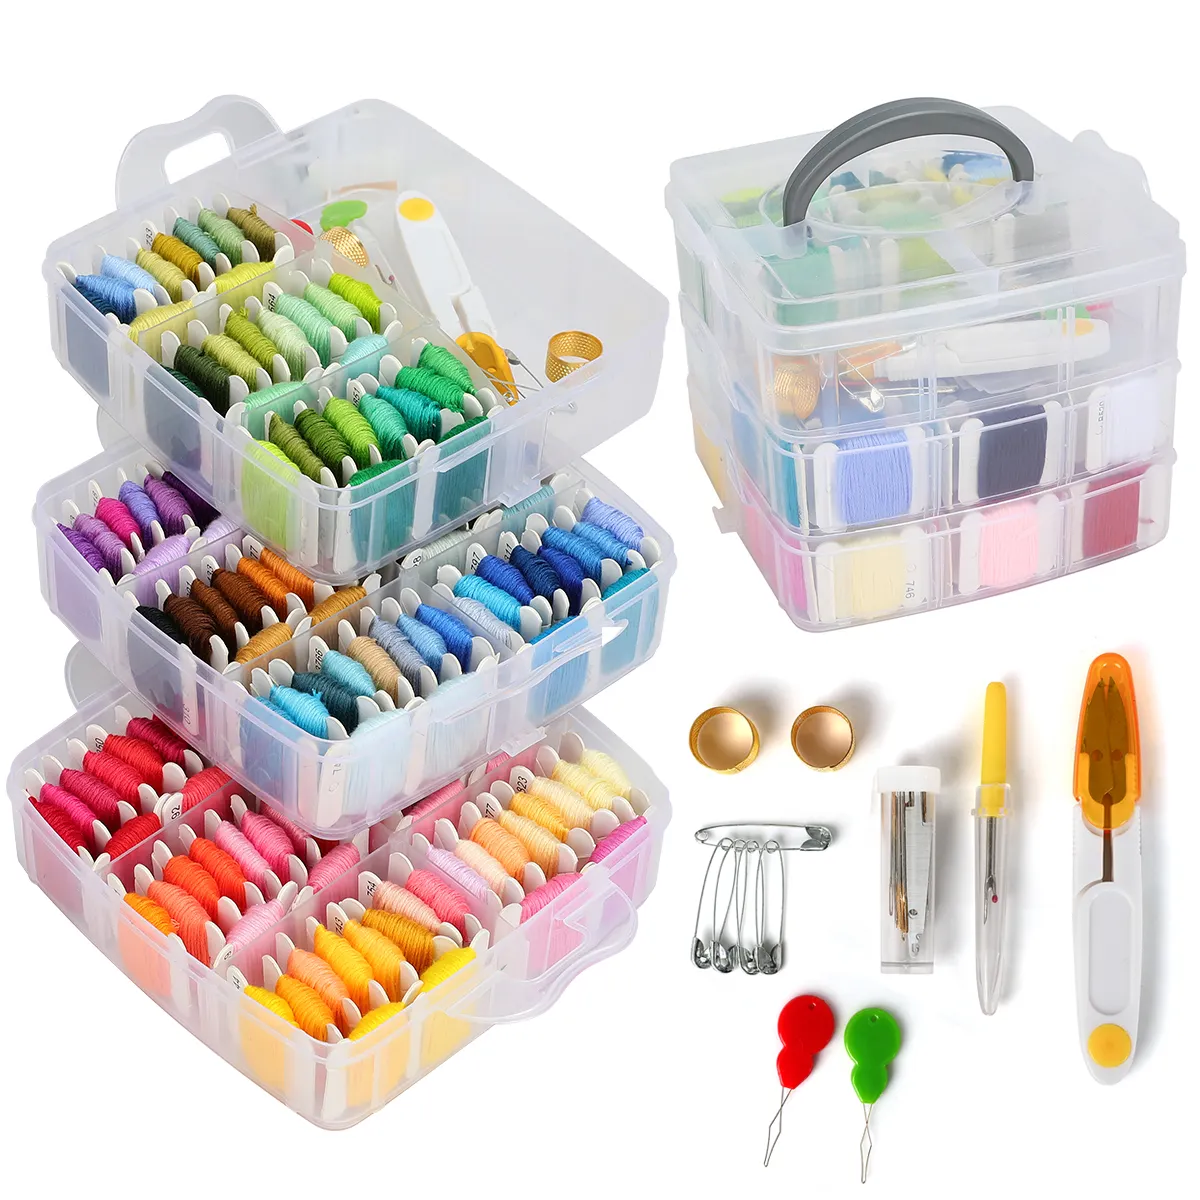 Hot-selling New 163pcs Three-layer plastic knitted storage box portable sewing kit box multi Compartment sewing organizer box